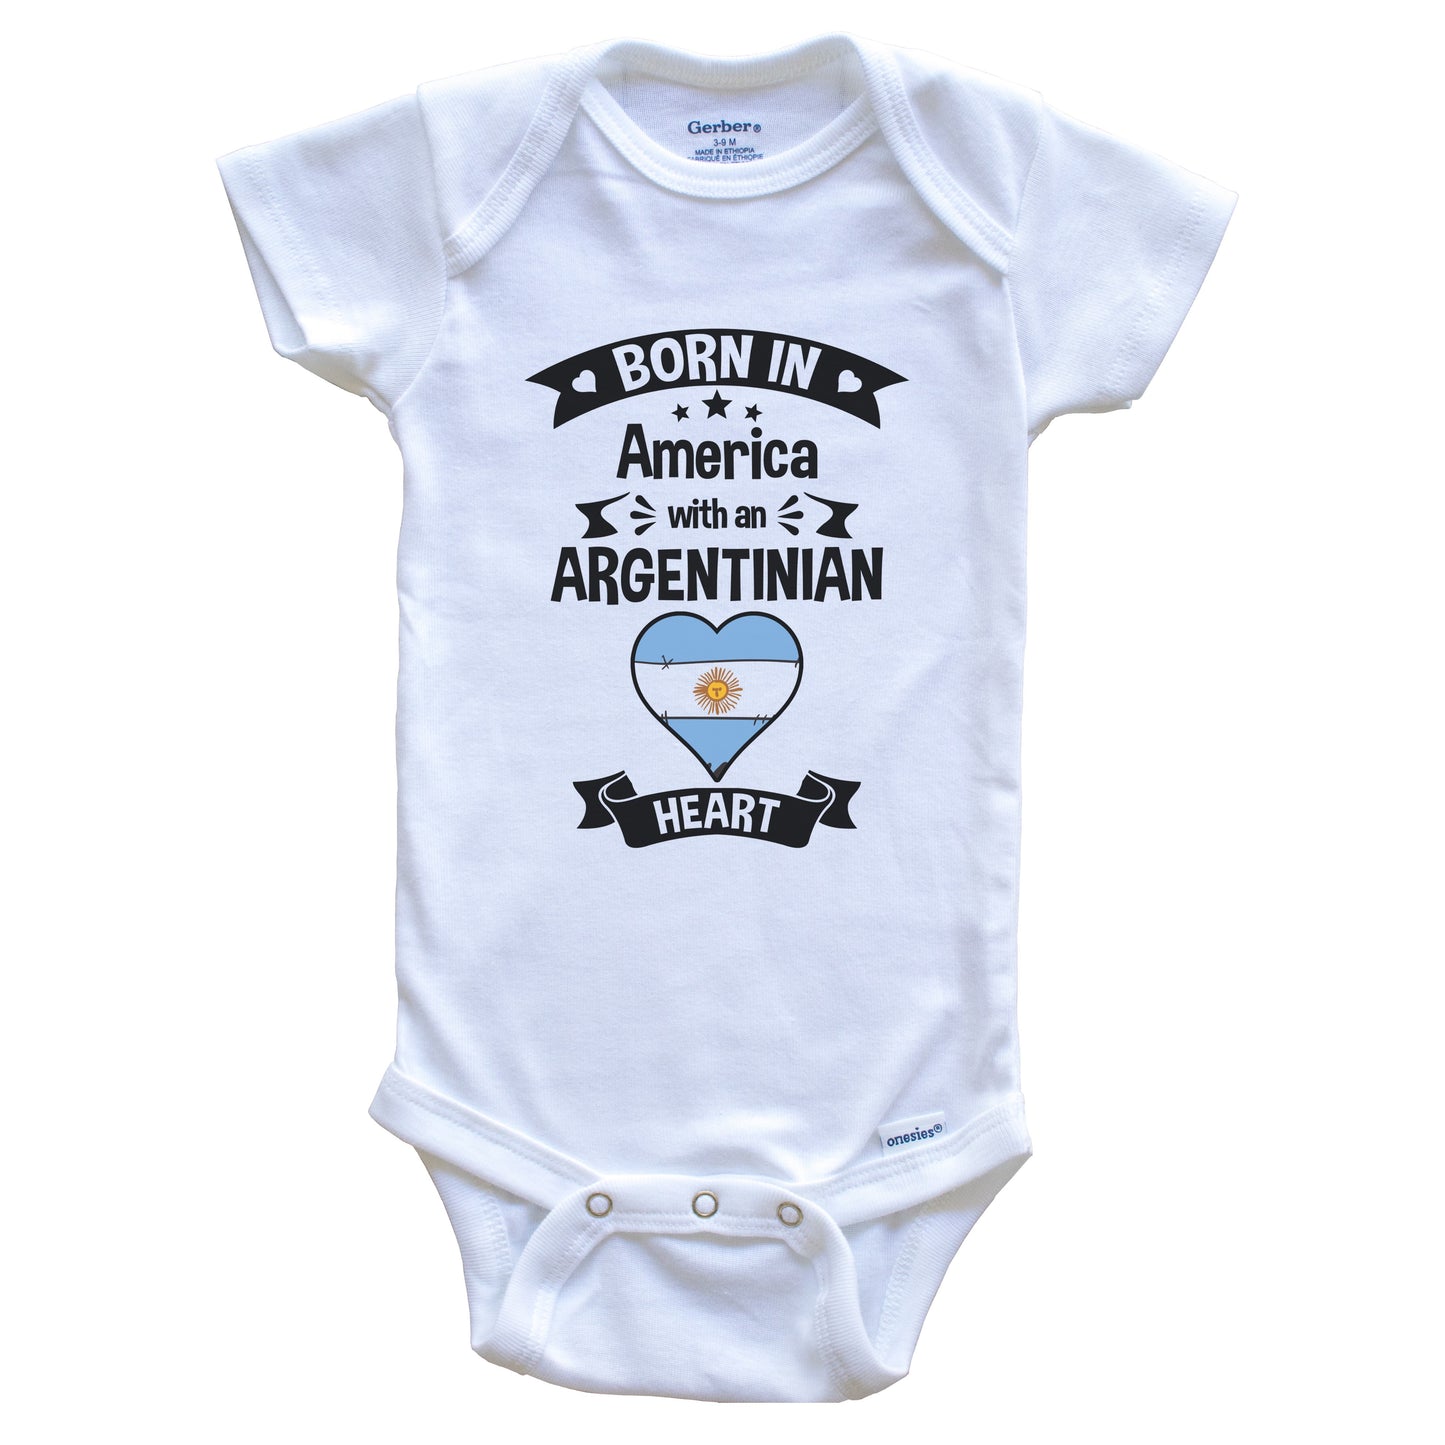 Born In America With An Argentinian Heart Baby Onesie